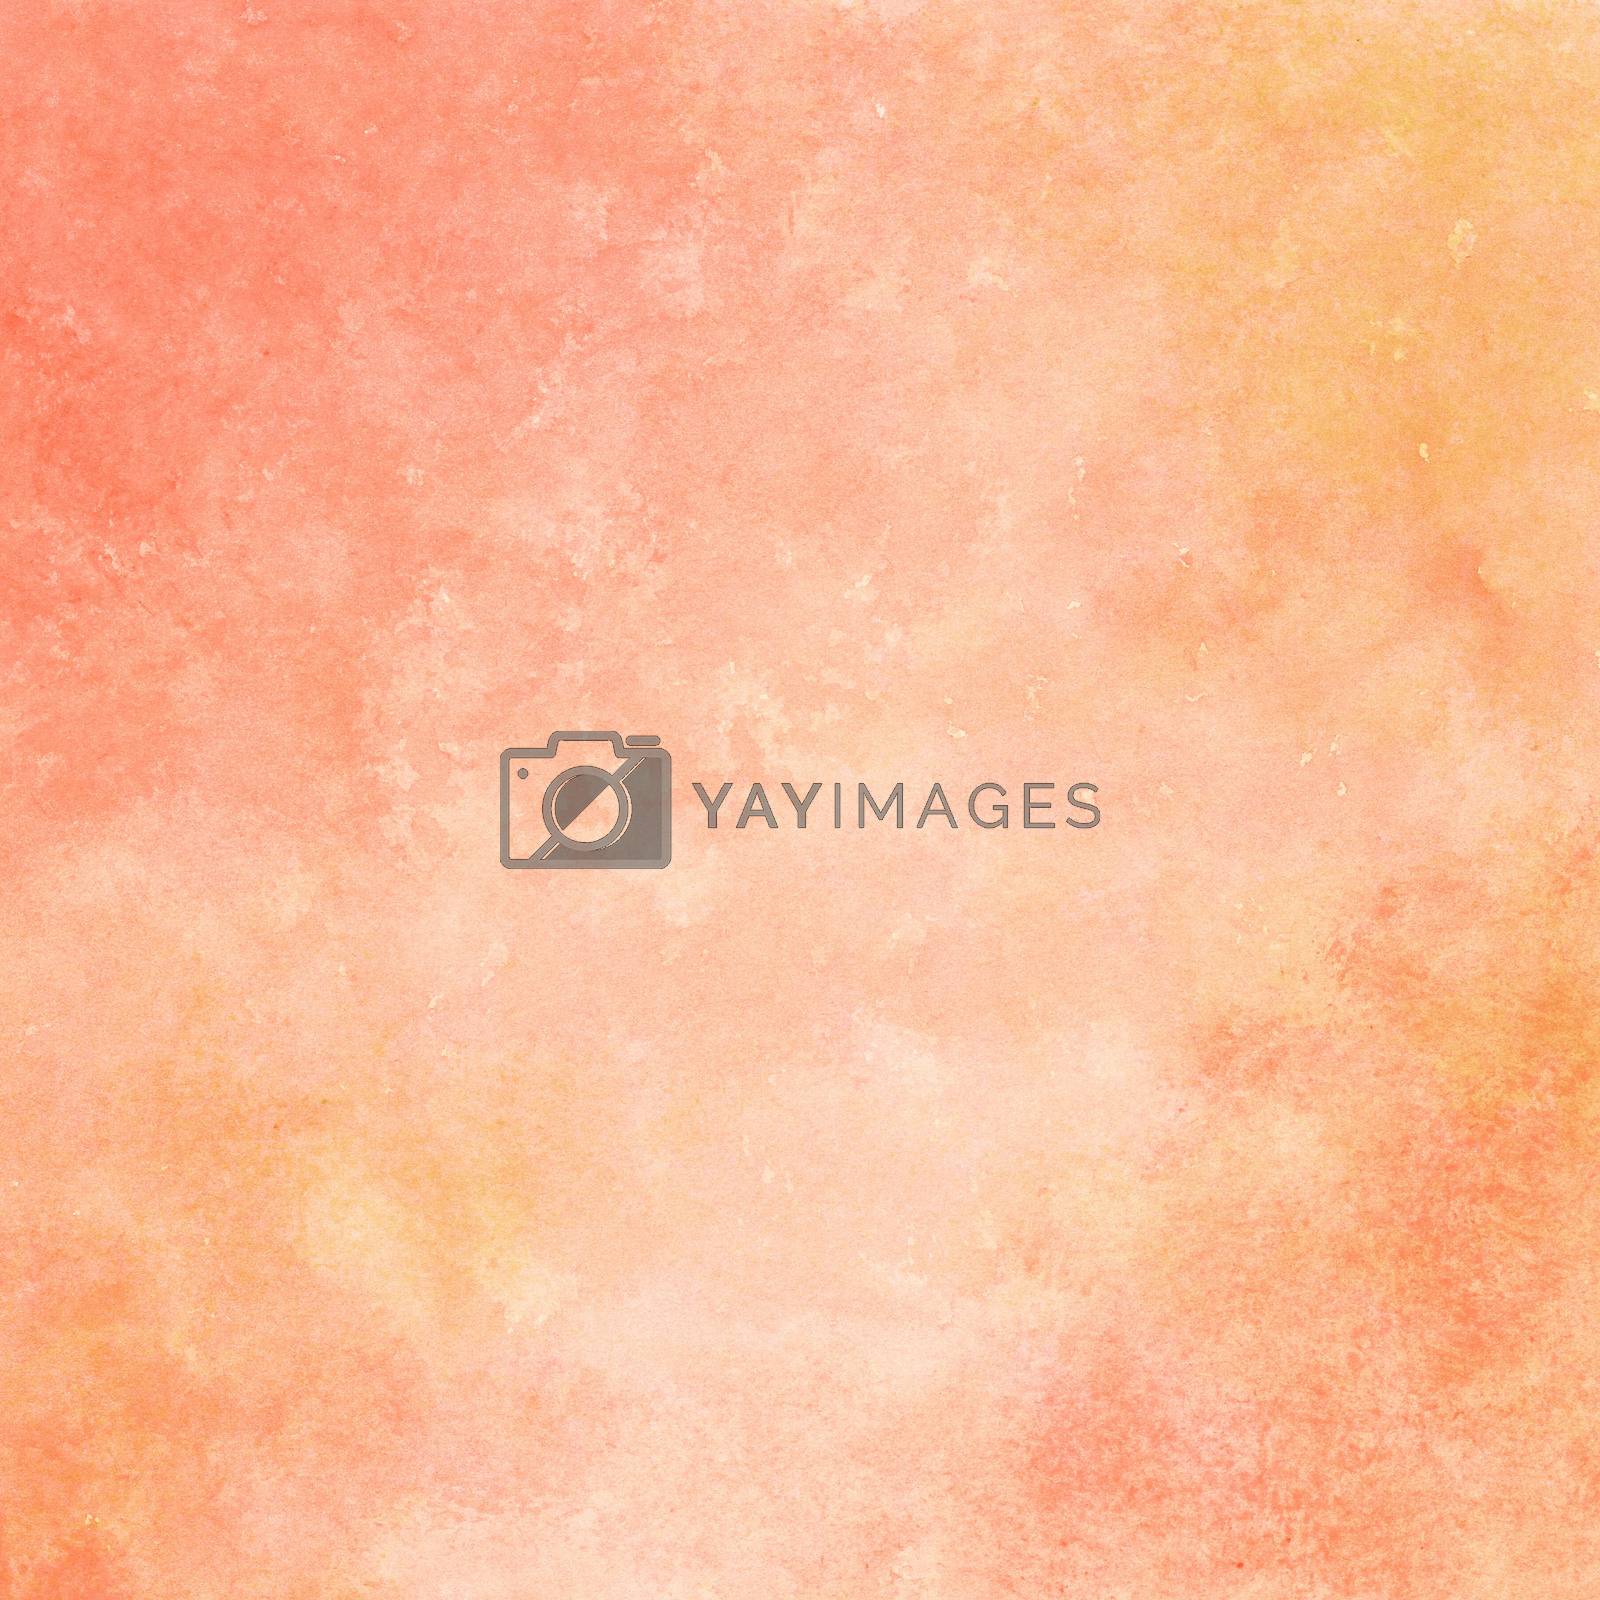 Royalty free image of peach and orange watercolor texture background, hand painted by nubephoto